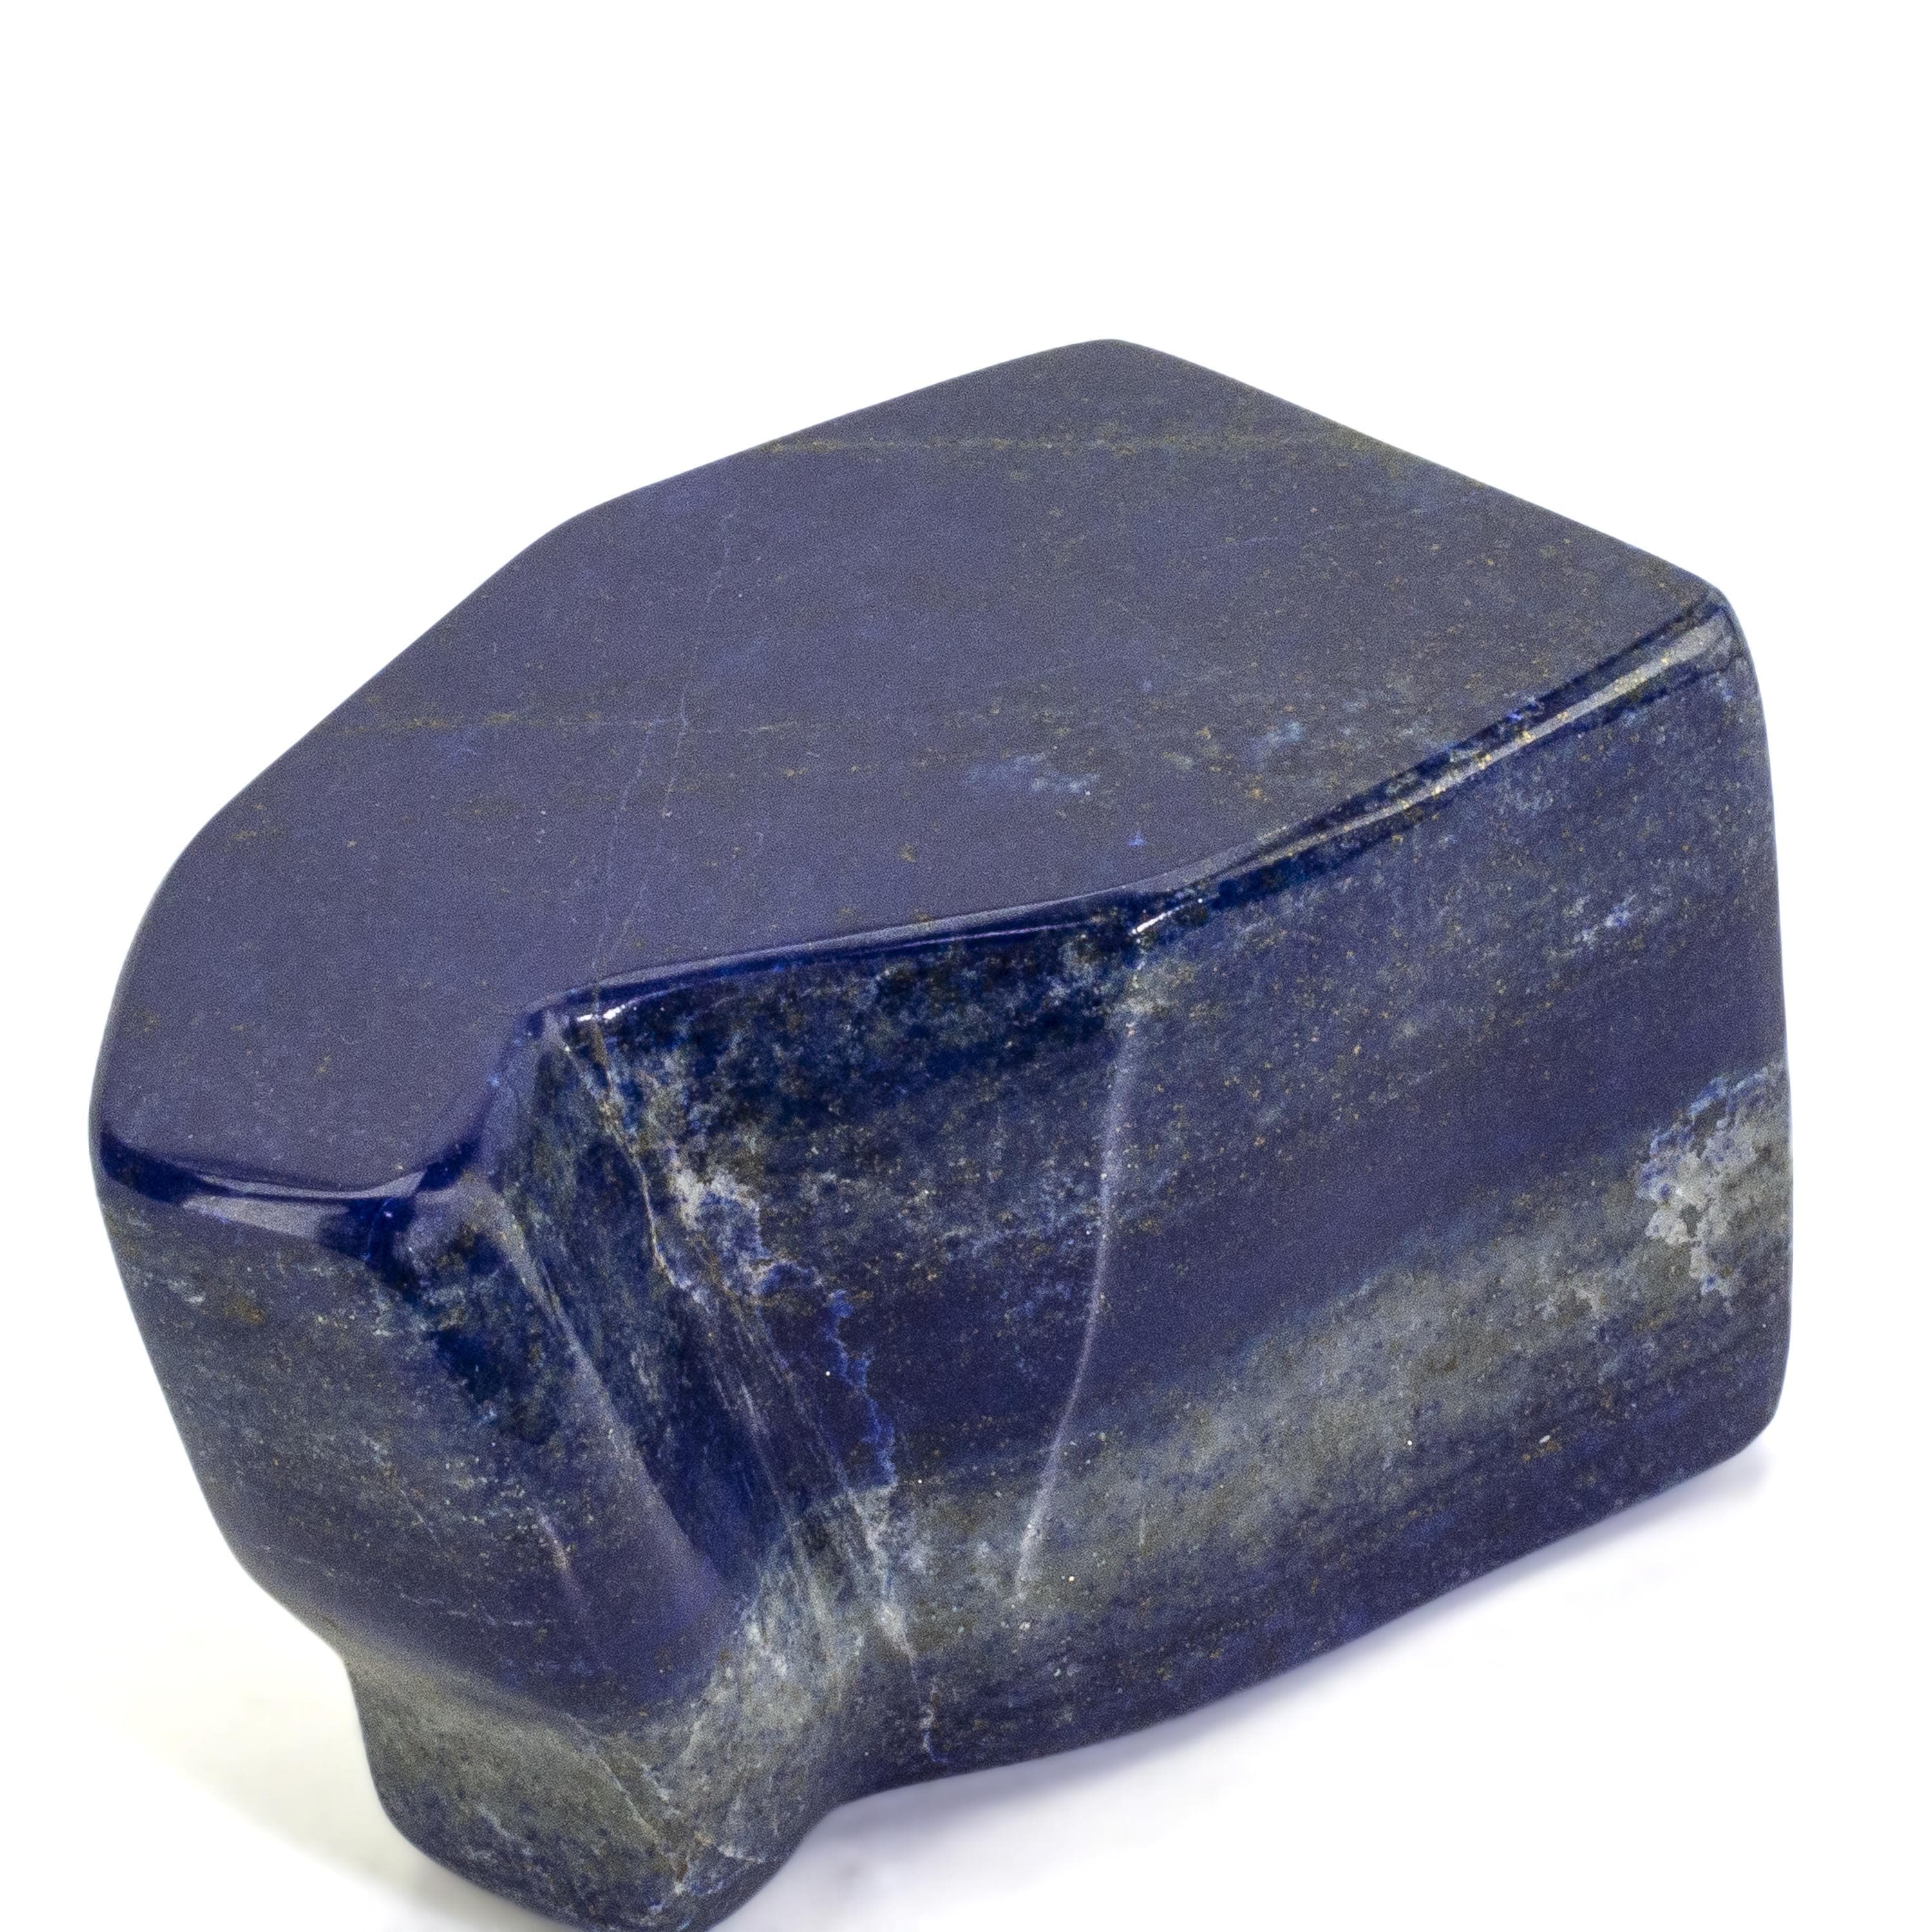 Kalifano Lapis Lapis Lazuil Freeform from Afghanistan - 605 g / 1.3 lbs LP700.001